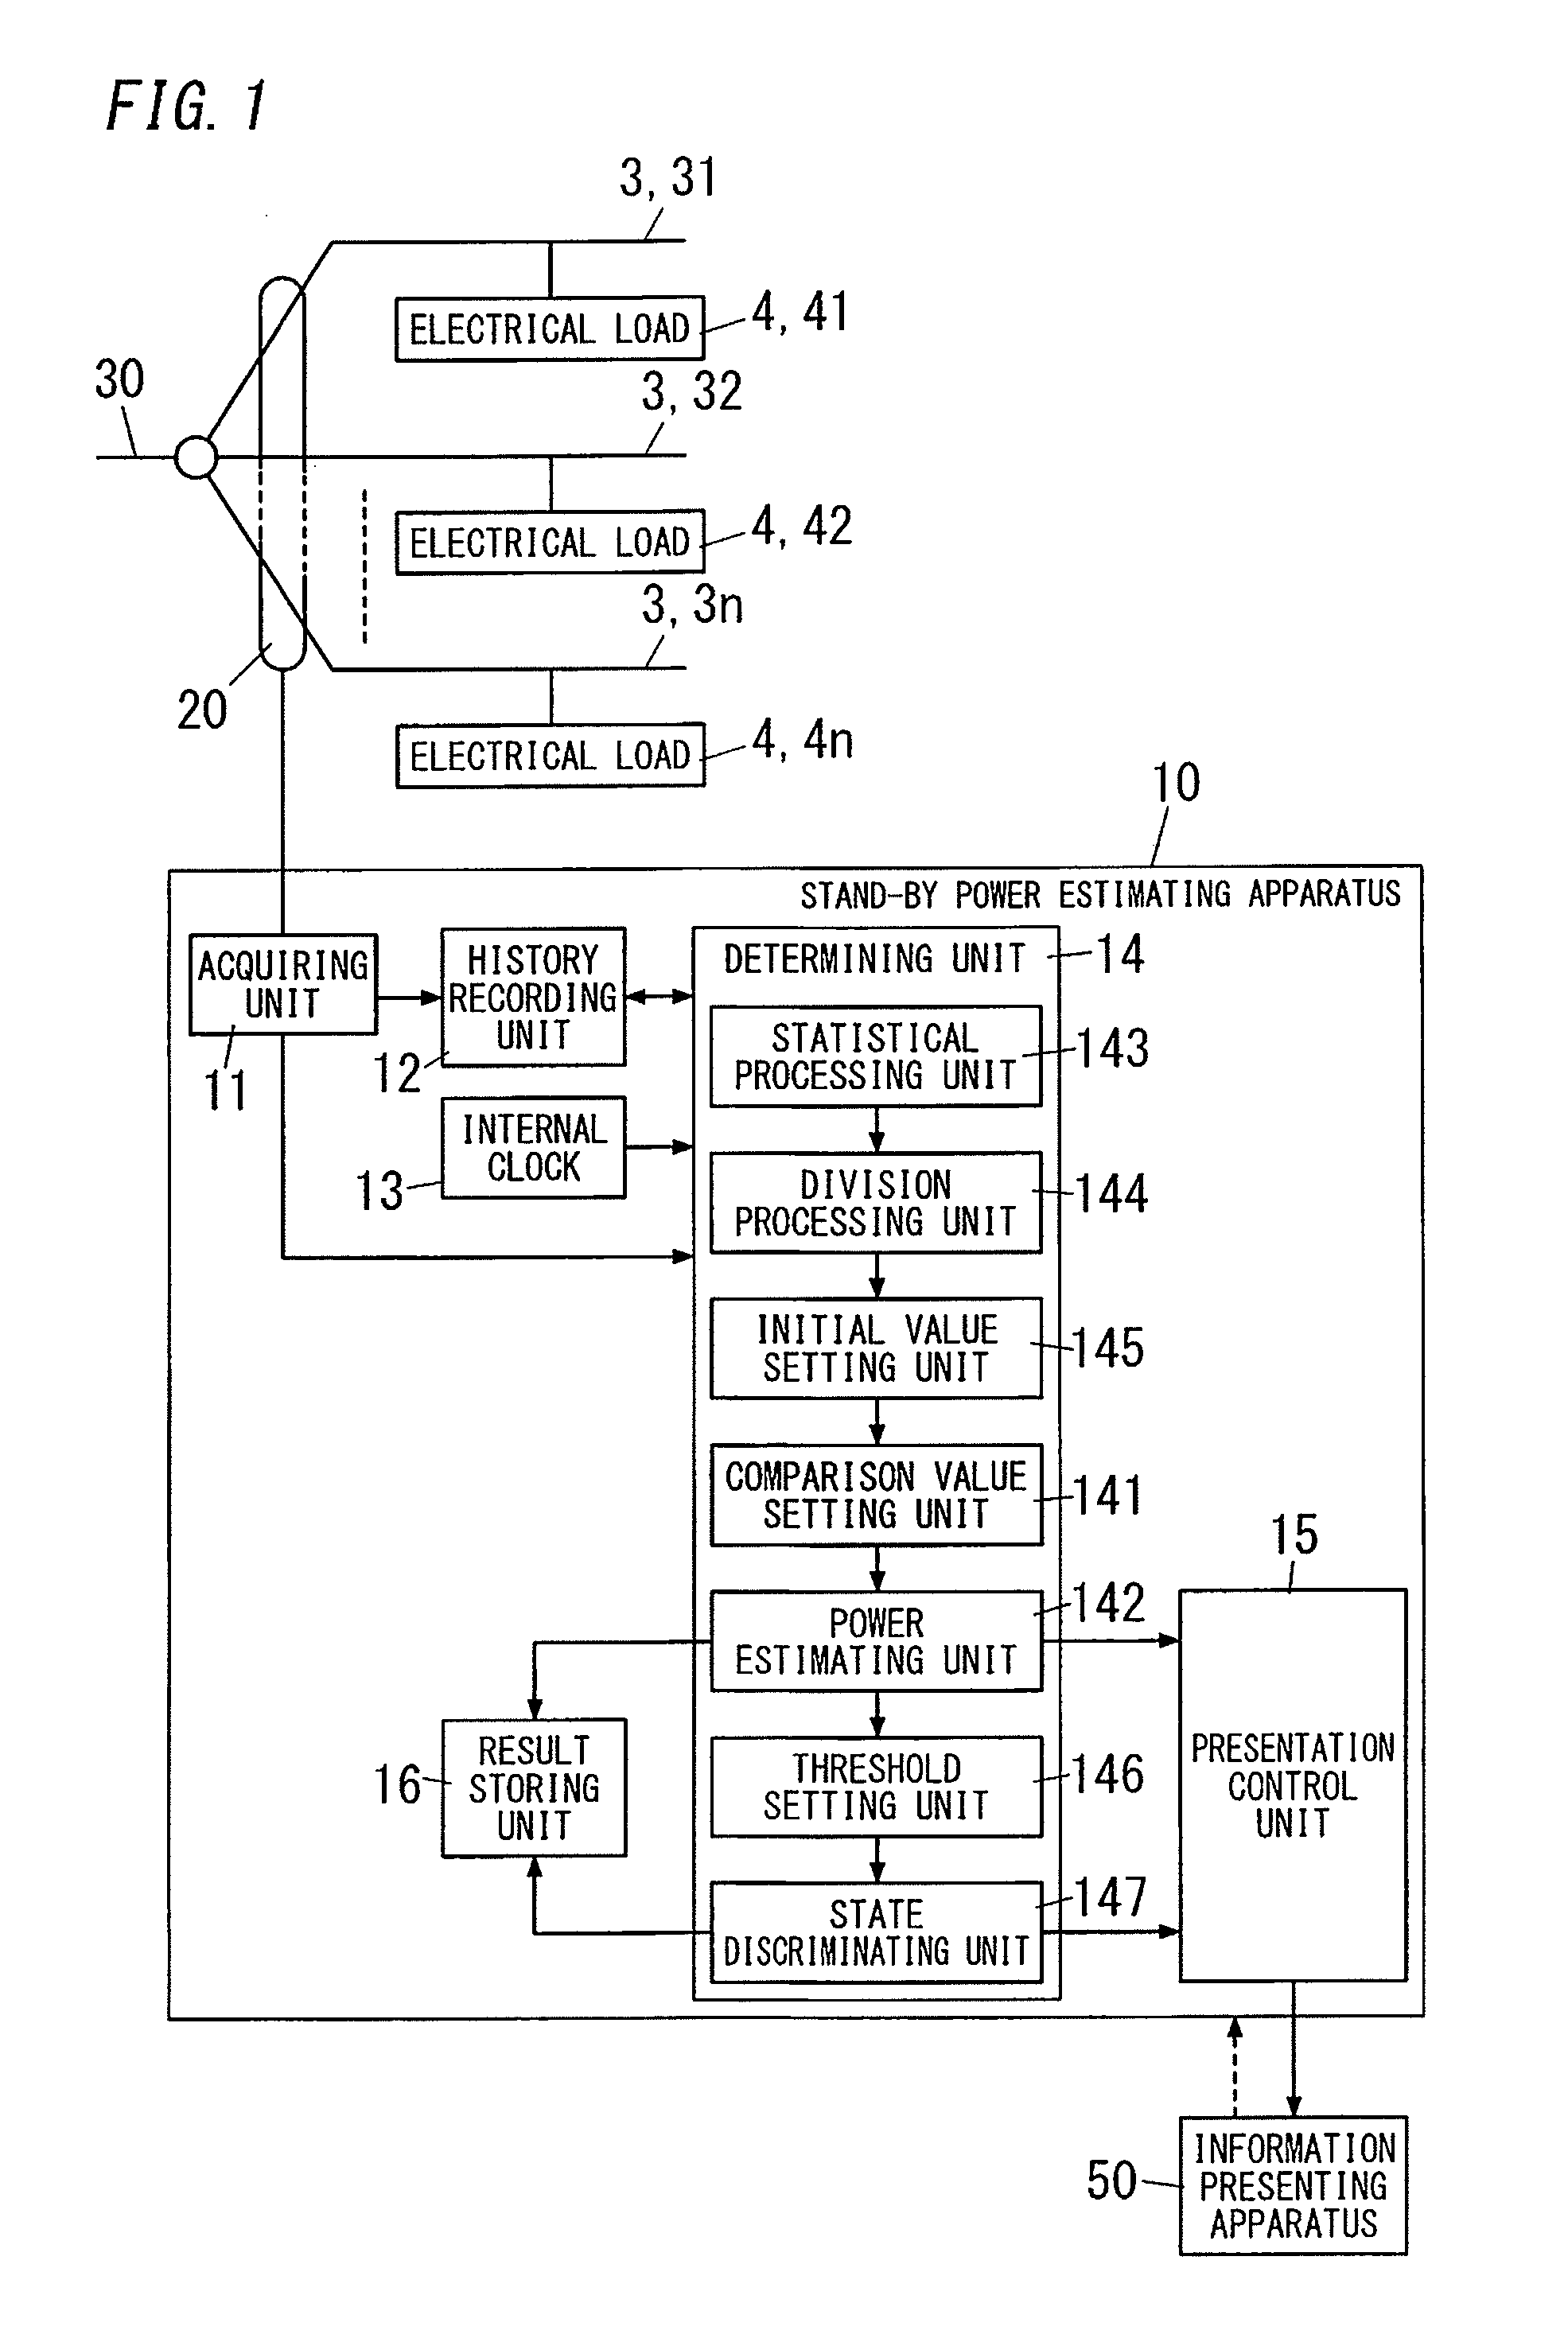 Stand-by power estimating apparatus and program